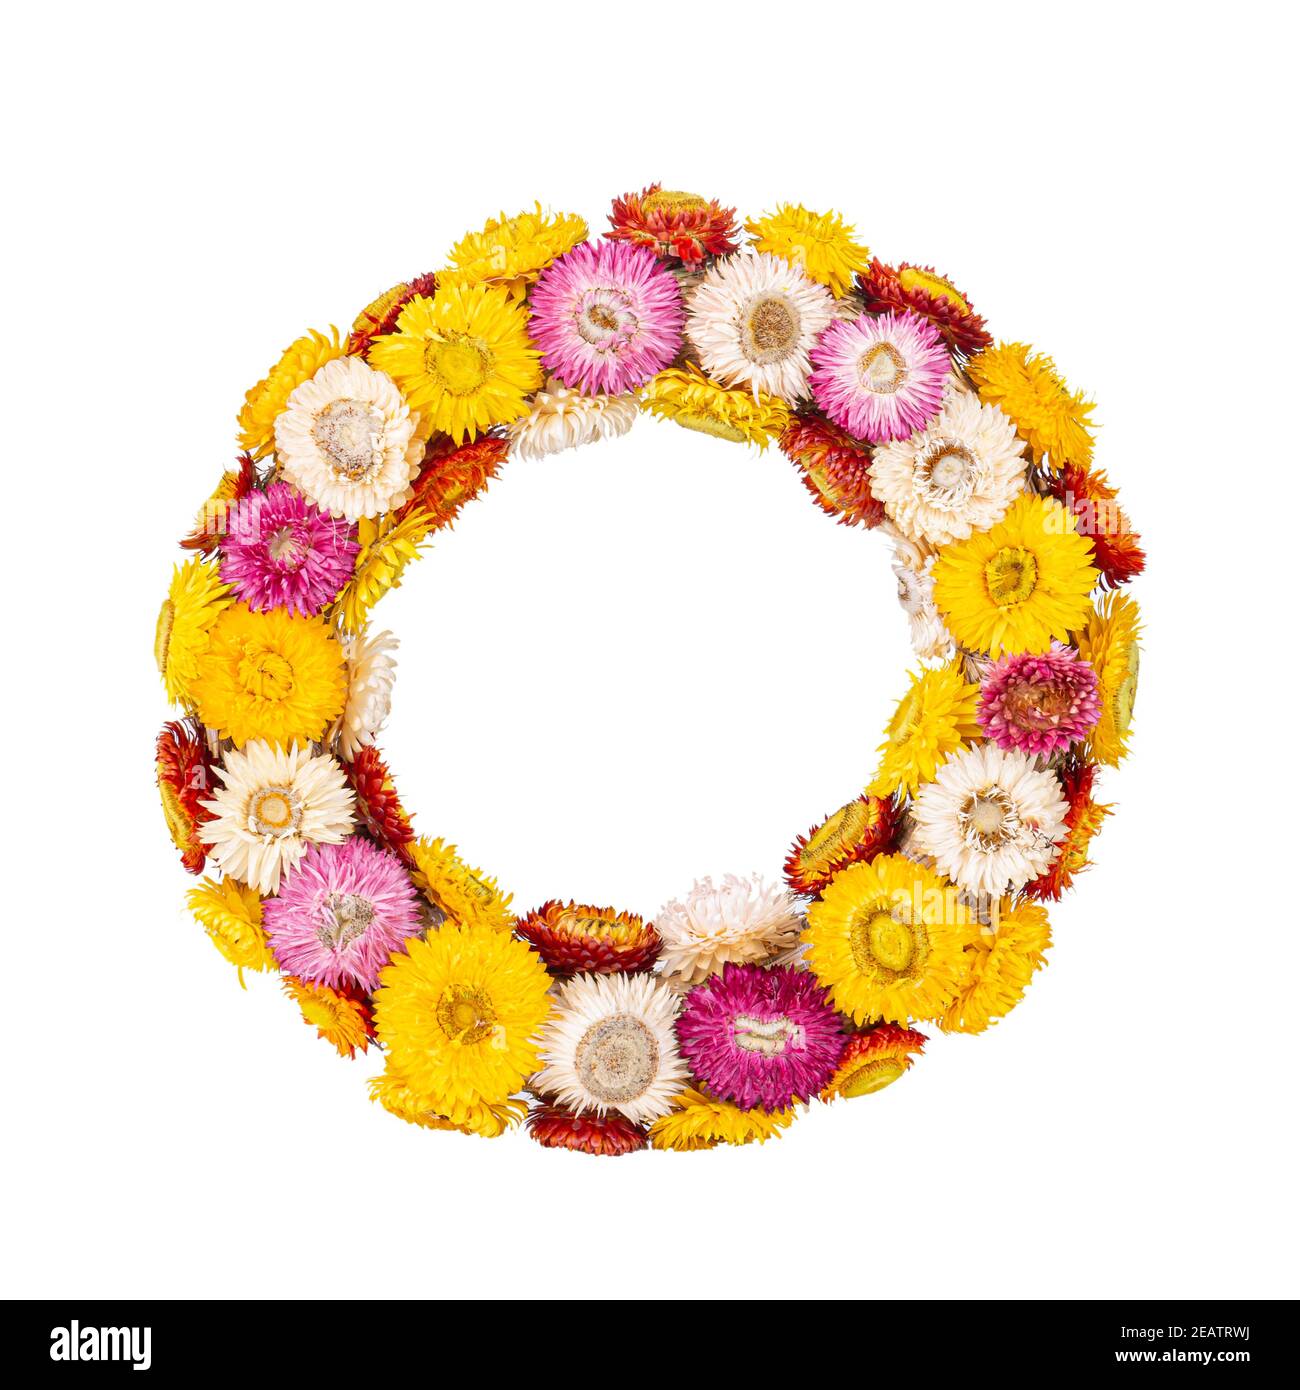 Colourful wreath of straw flower Stock Photo